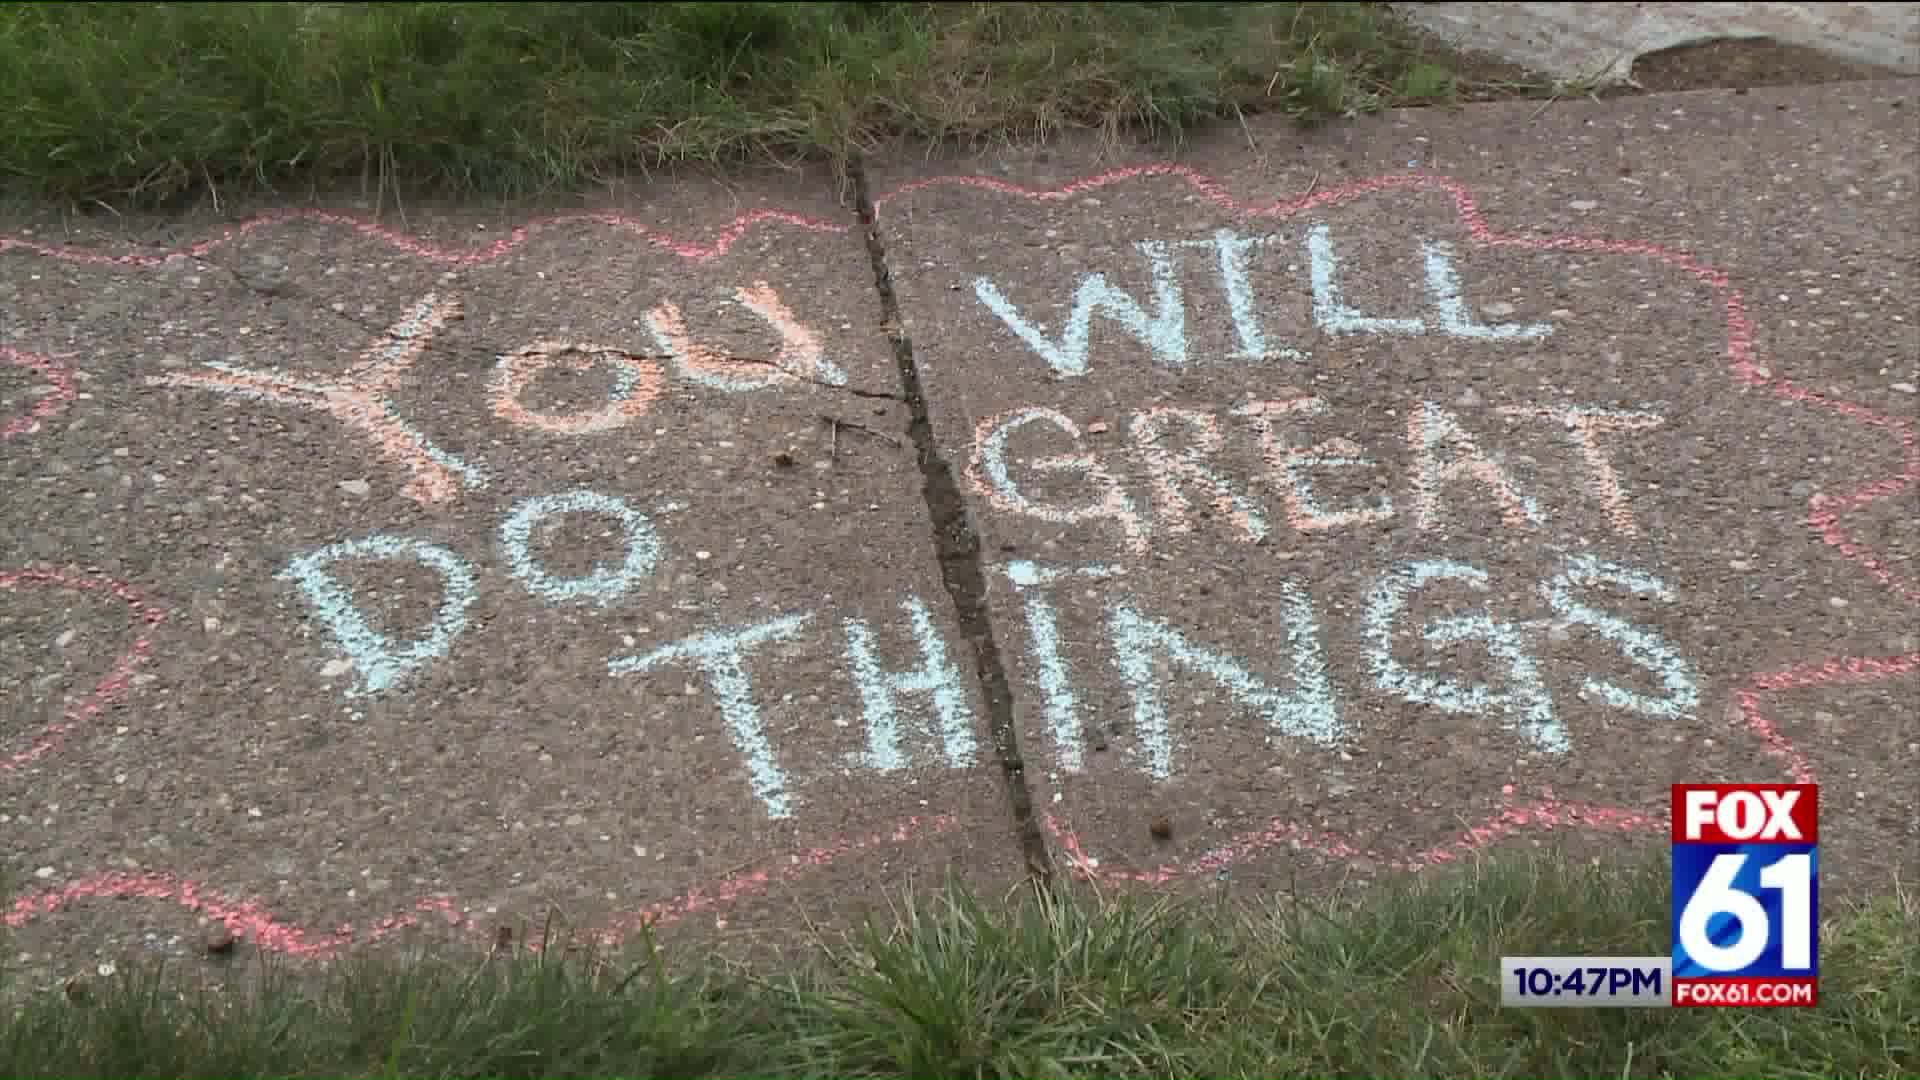 Spreading positive messages on the first day of school in Manchester